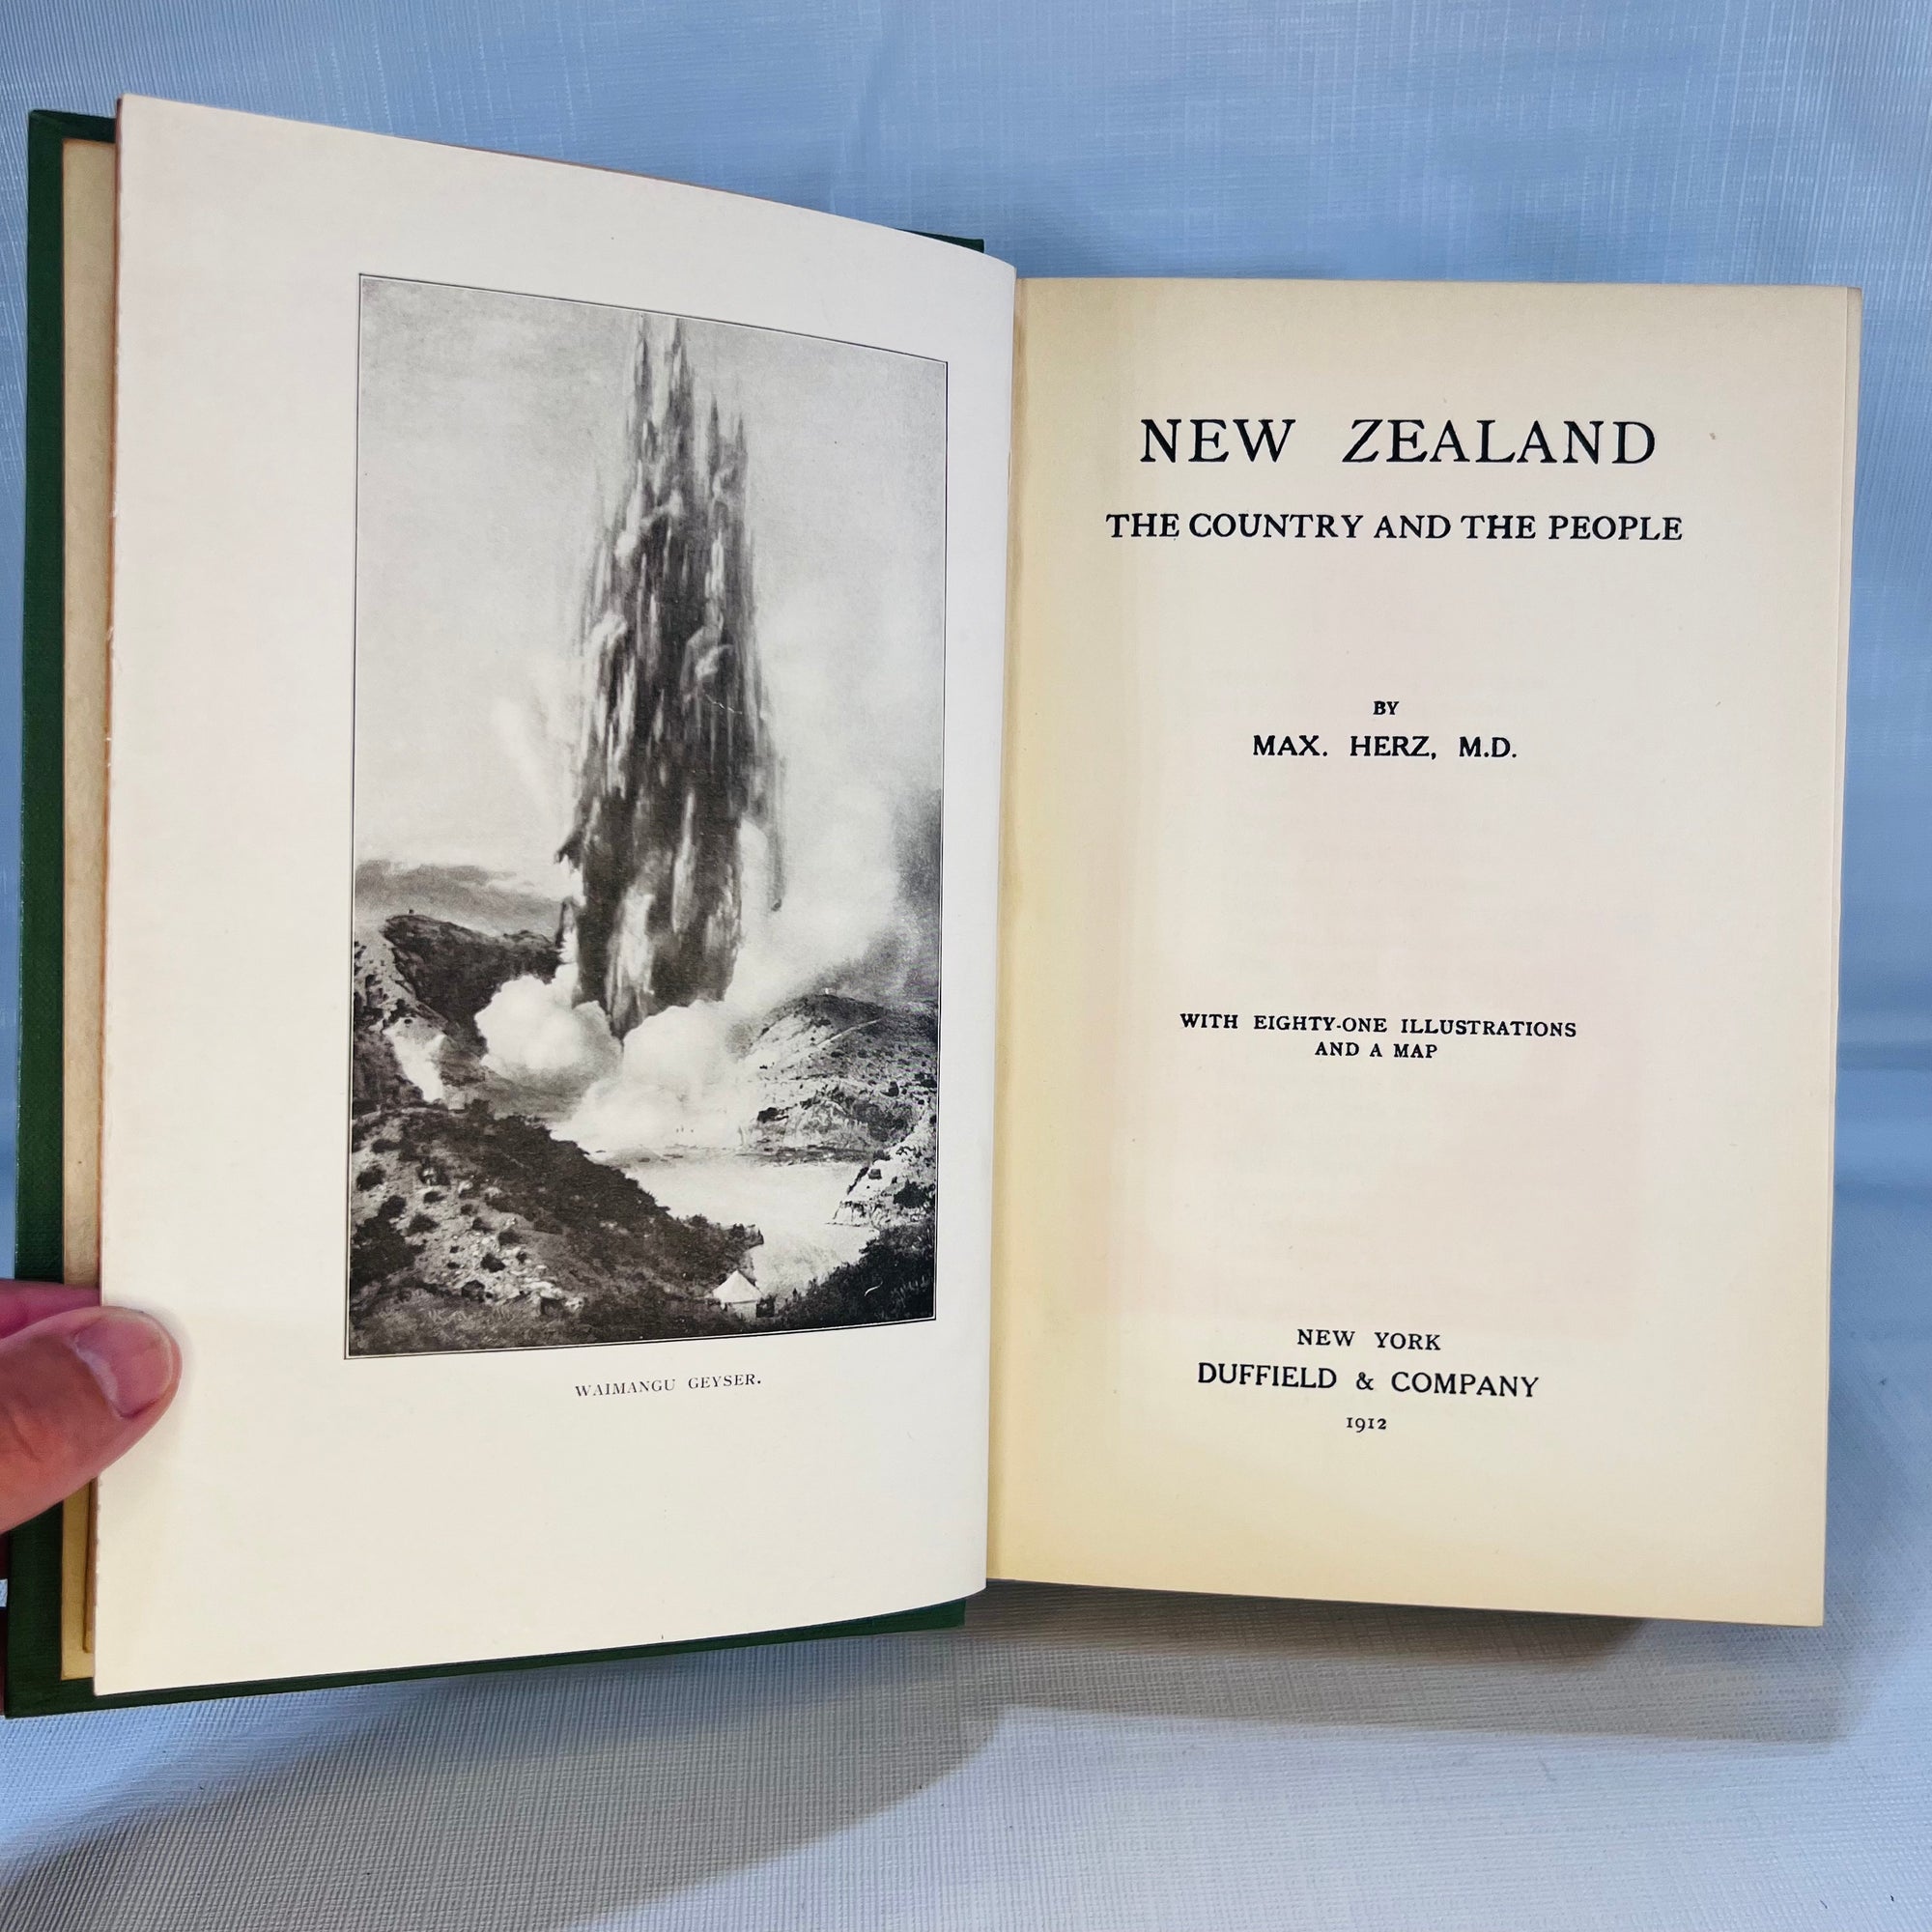 New Zealand the Country and the People by Max Herz 1912 with eighty-one Illustrations and a Map Duffield & Co